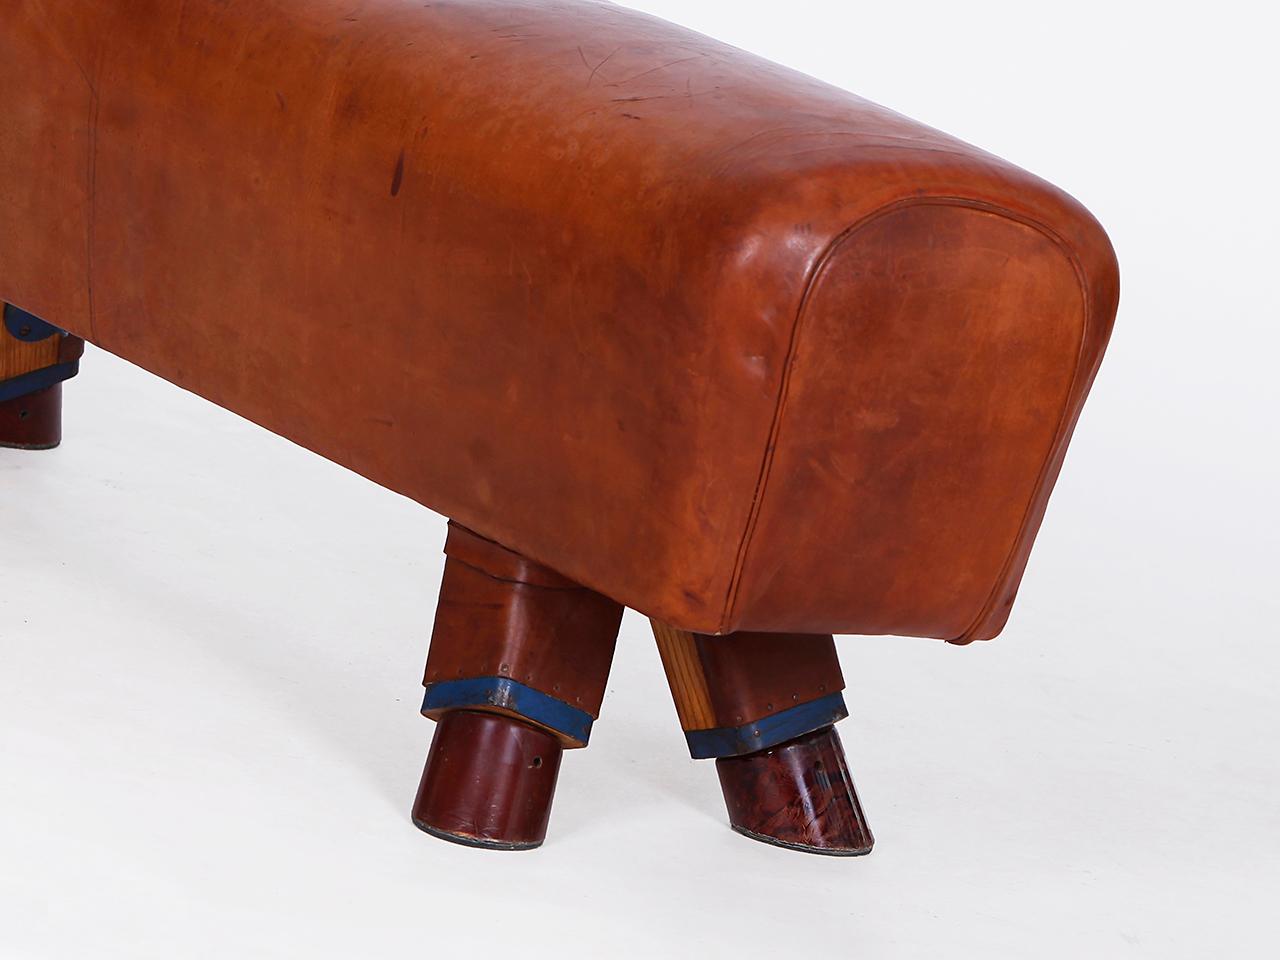 Gymnastic Leather Pommel Horse Bench Top, 1930s For Sale 1